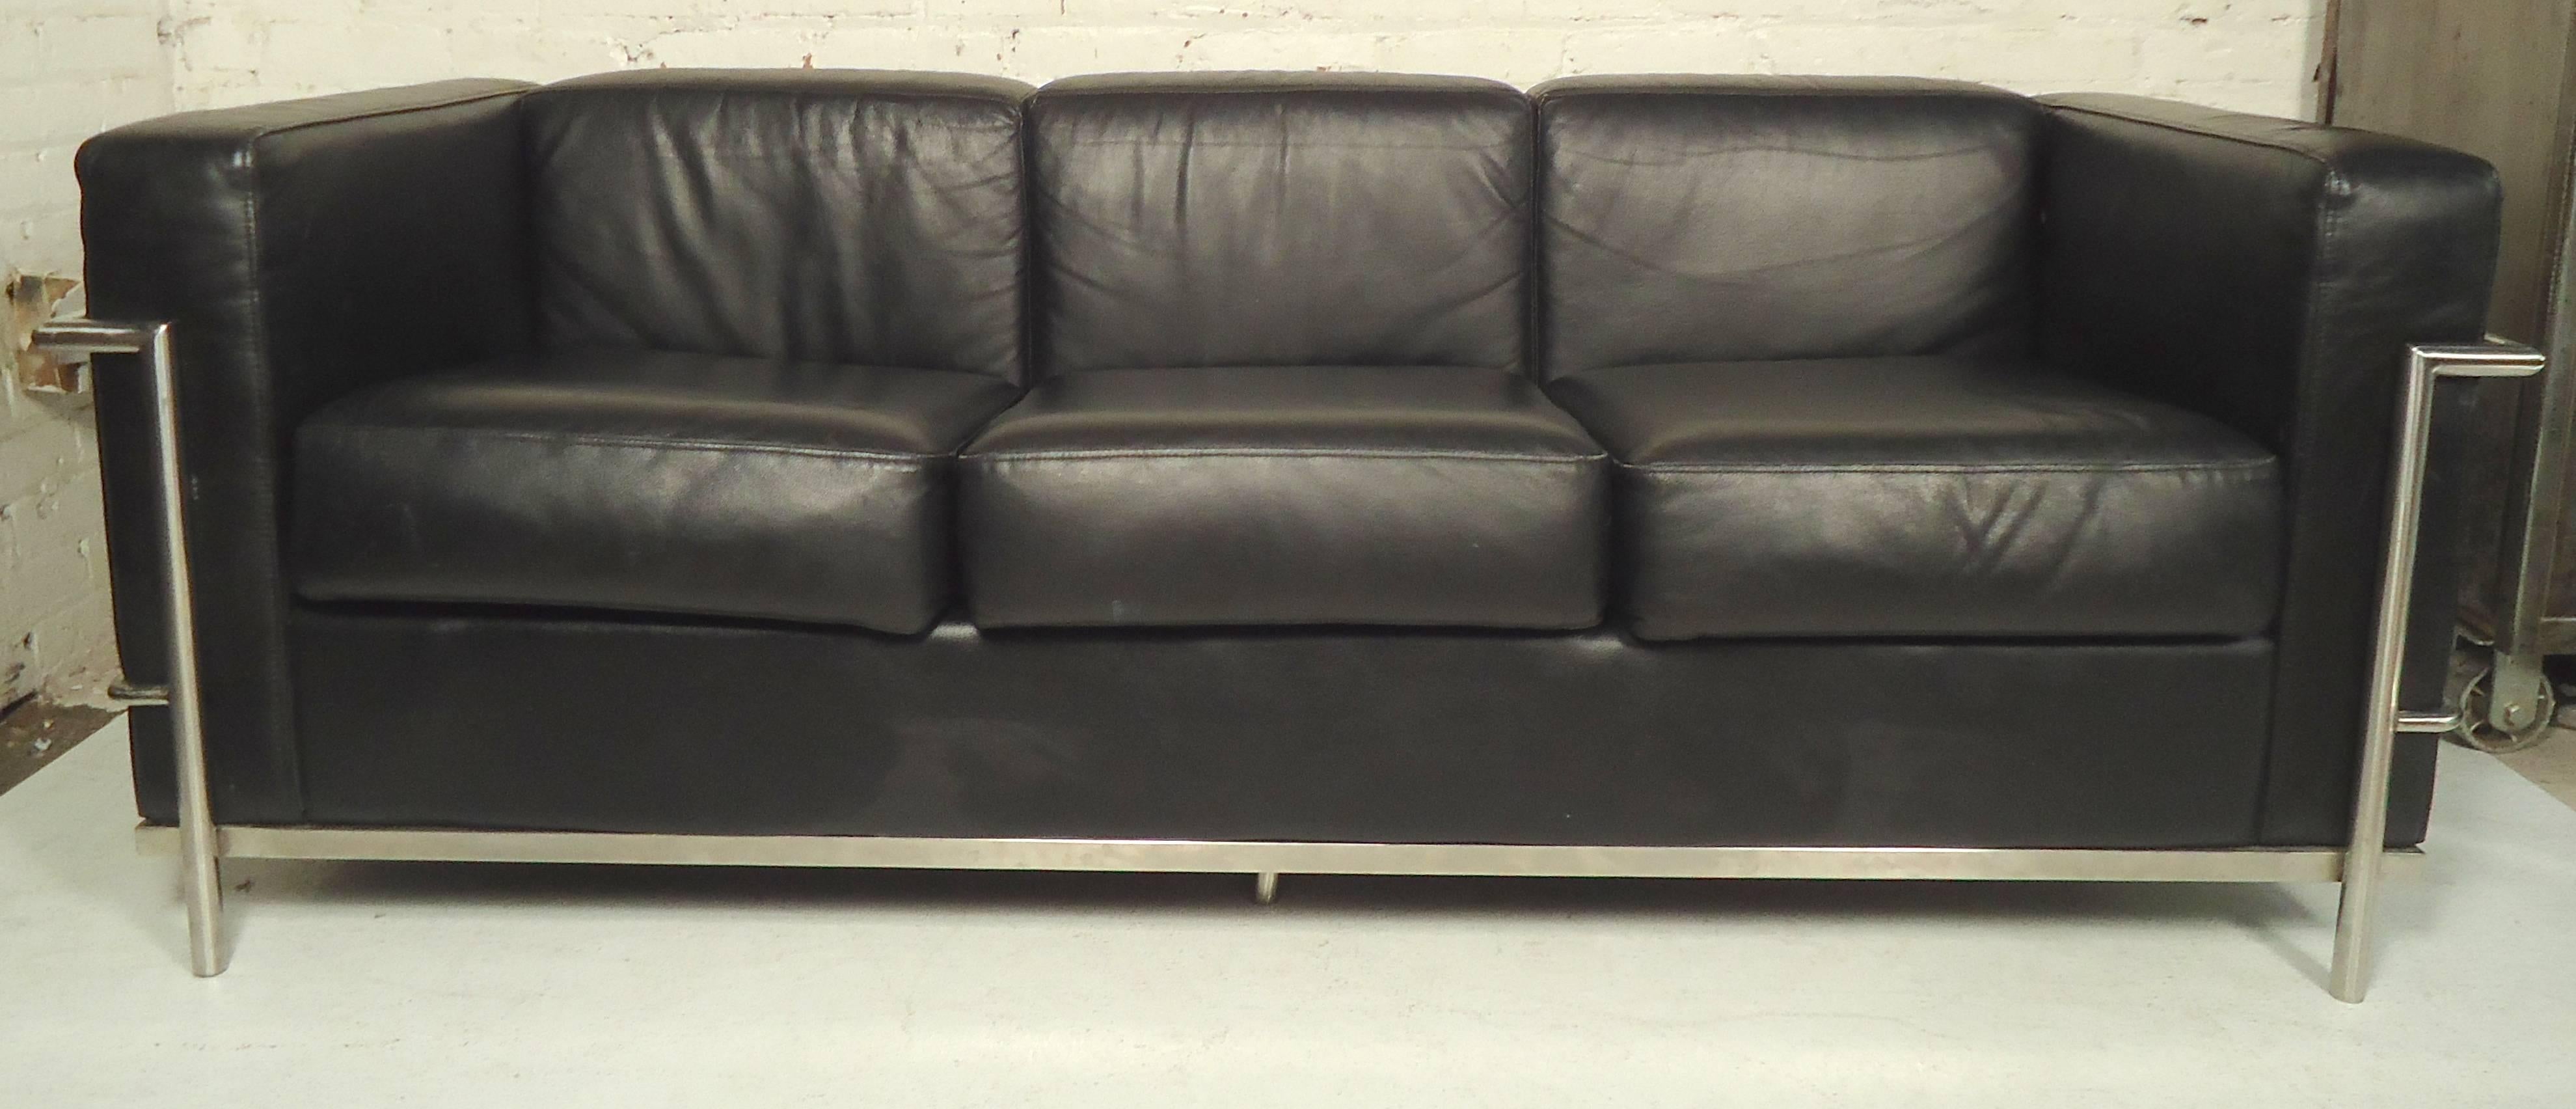 Mid-Century Modern style black sofa with chrome frame. Comfortable three seat sofa in the style of Cassina.

(Please confirm item location - NY or NJ - with dealer).
  